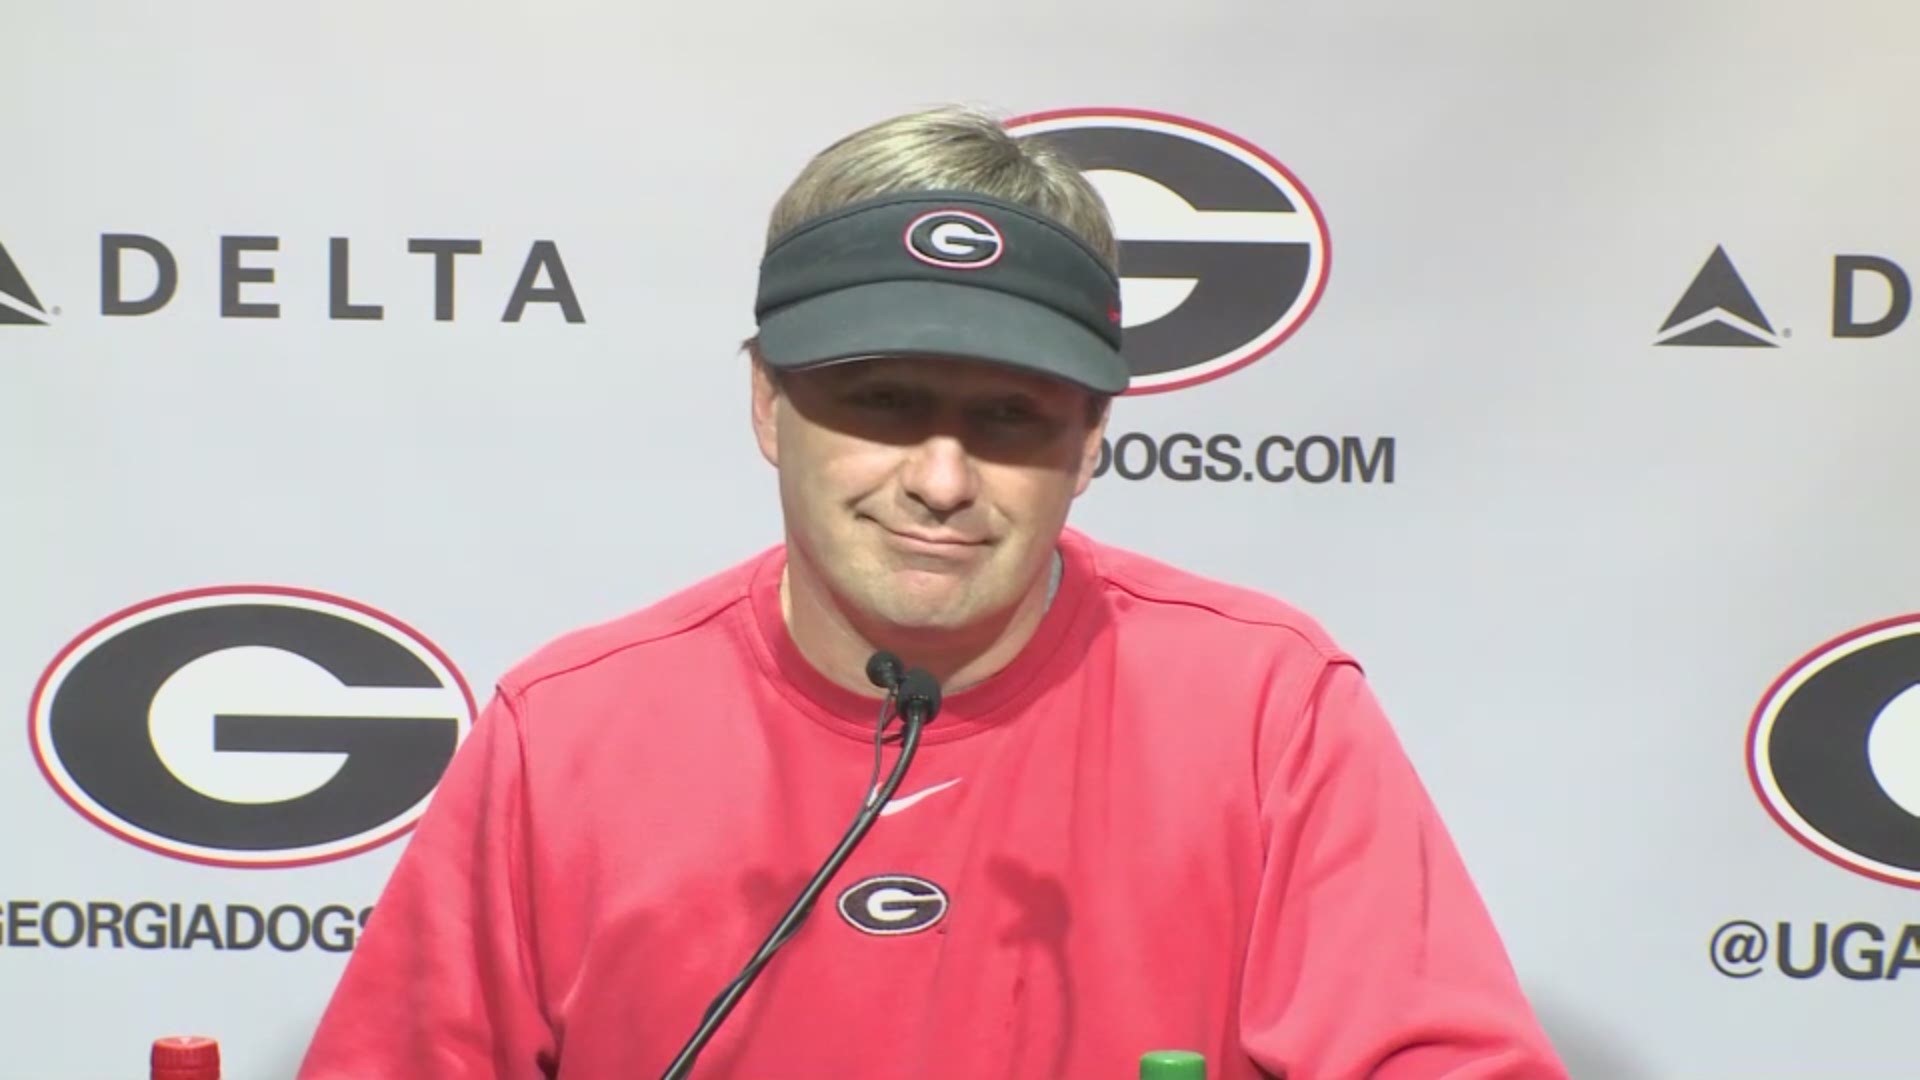 It wasn't too far into the presser that Smart addressed what was on everyone's minds: What about Justin Fields?